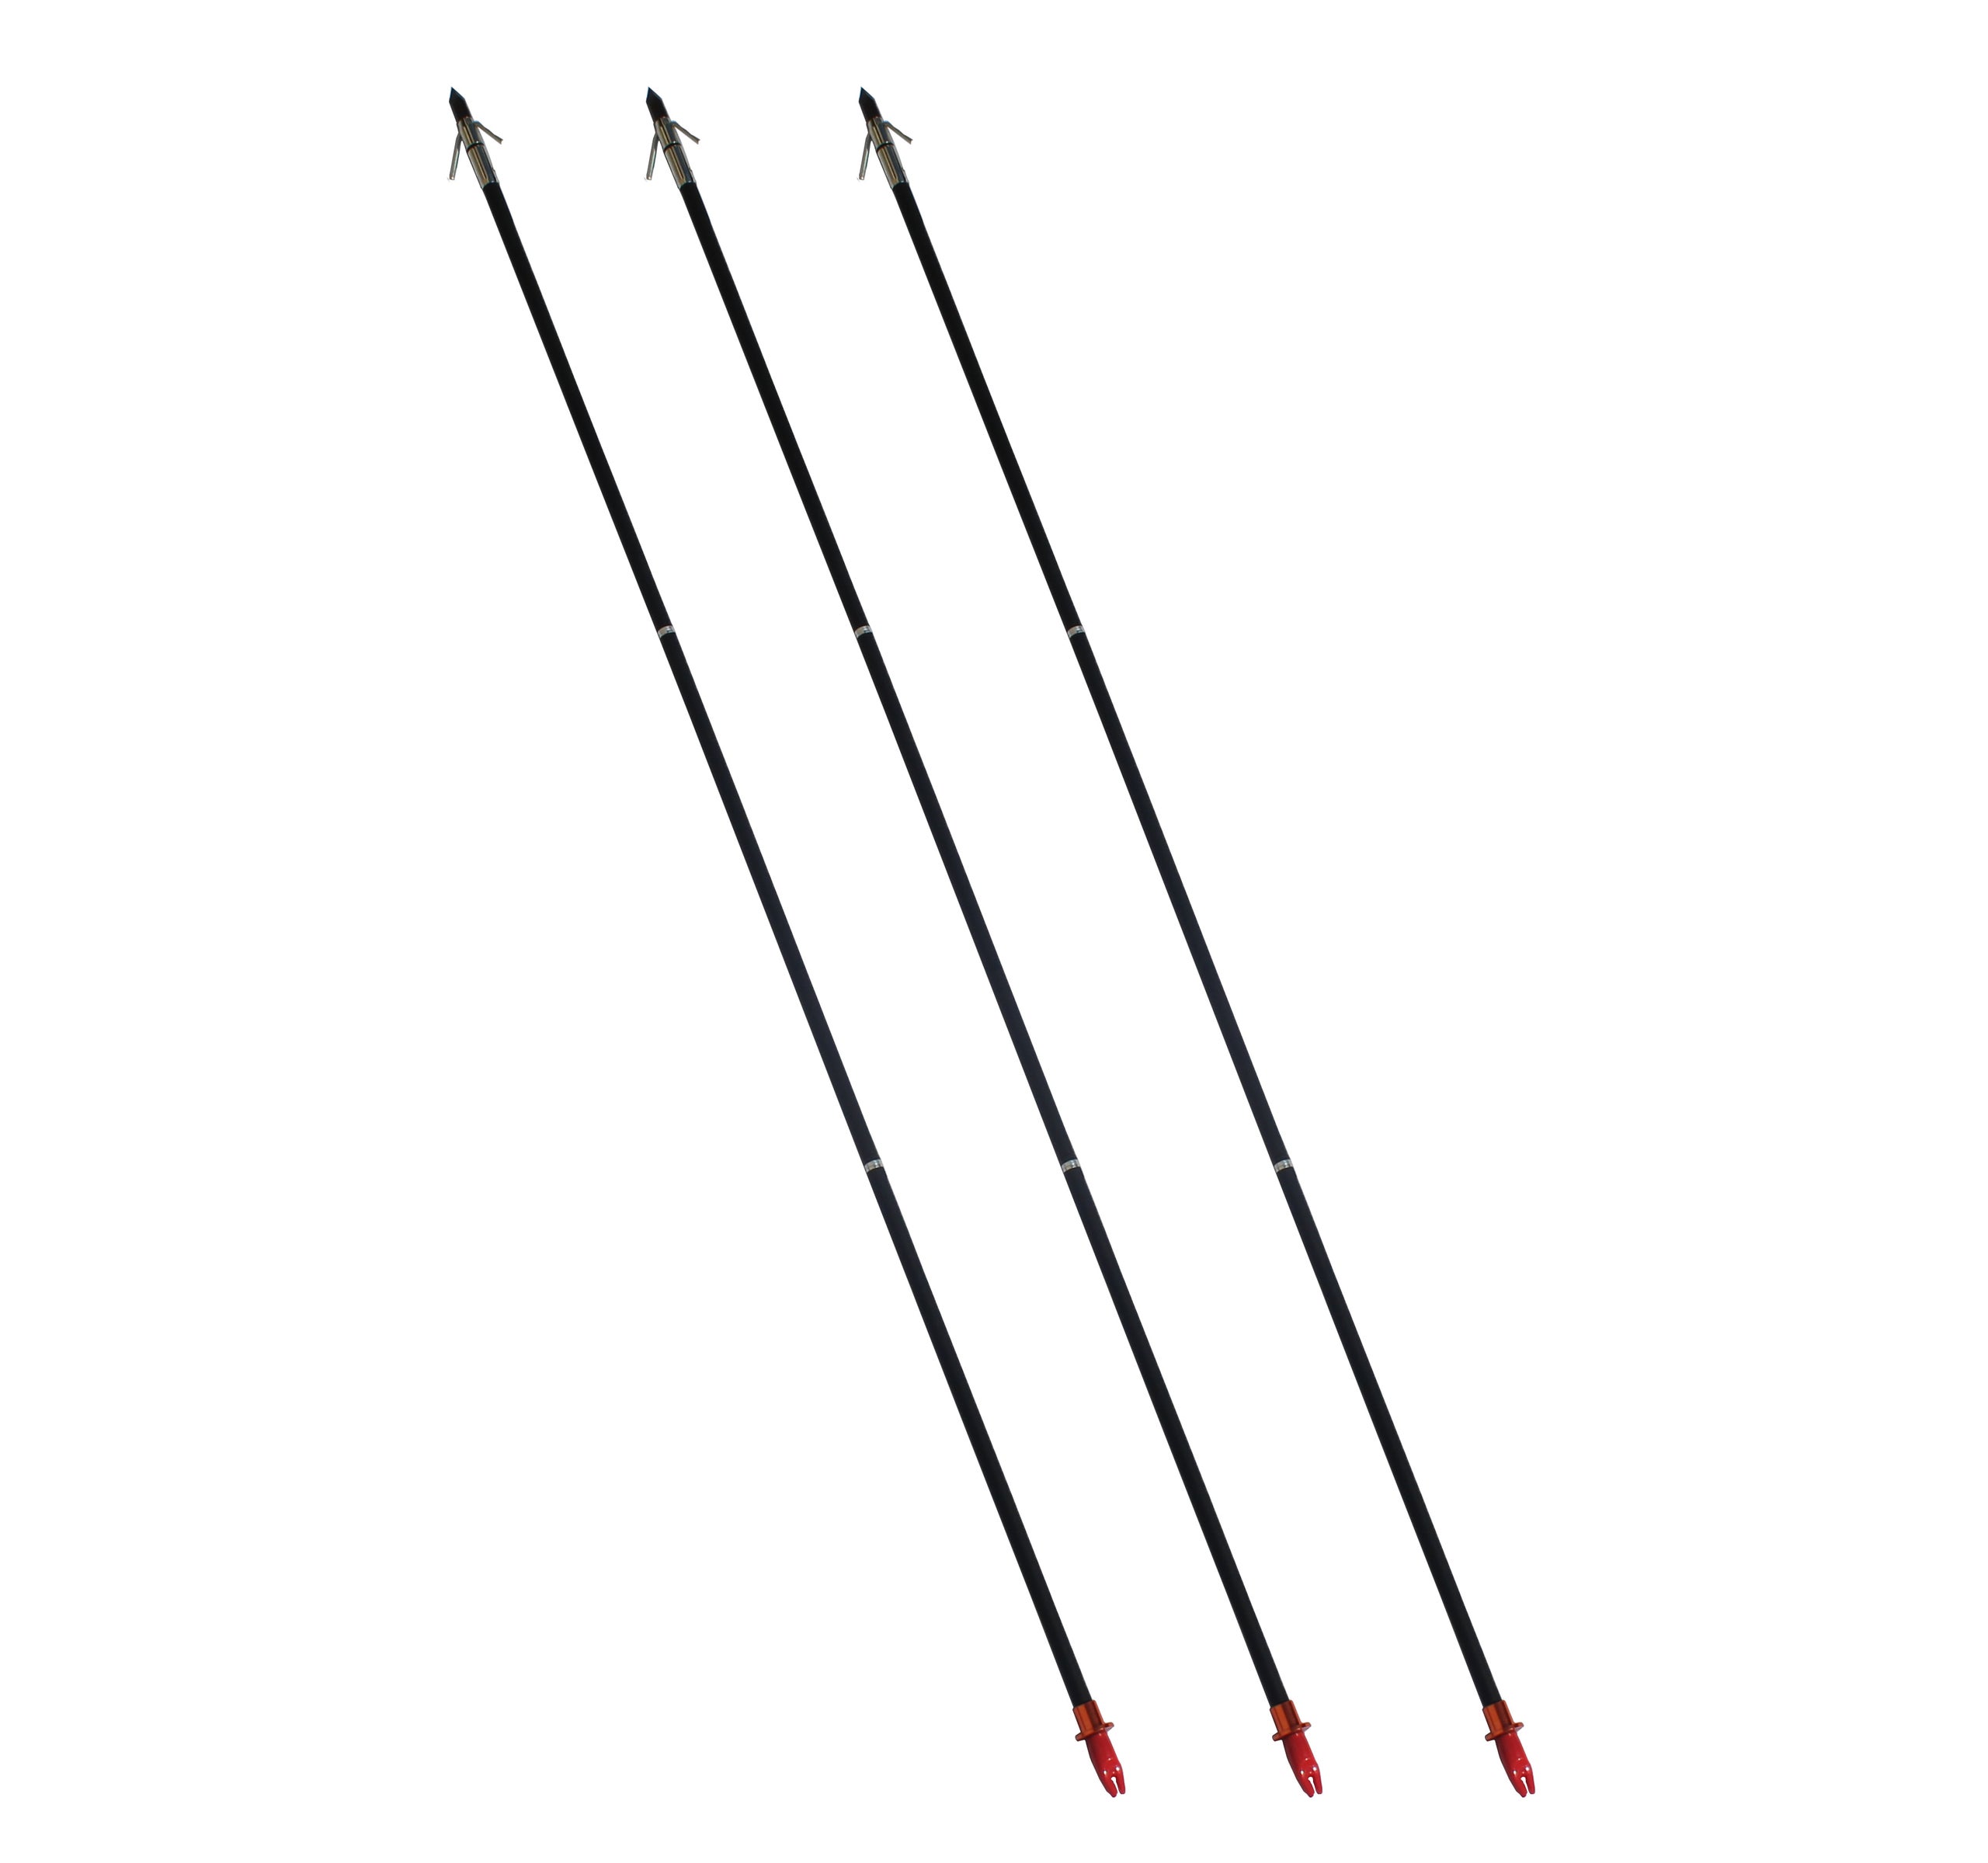 3 Piece Take Down Bow Fishing Arrows (3 Pack)